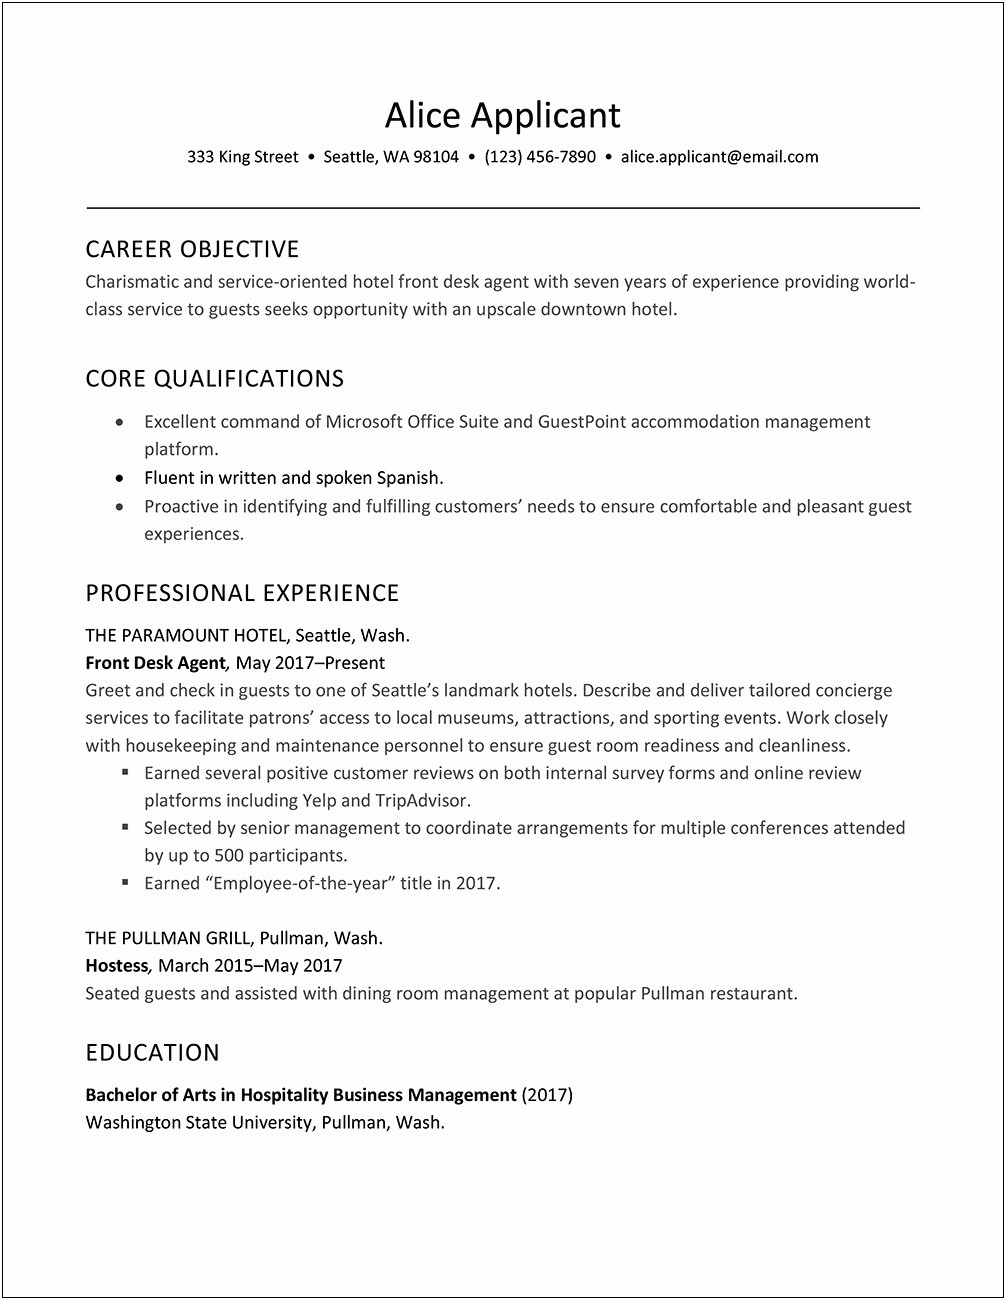 Resume Objective For Hotel Receptionist